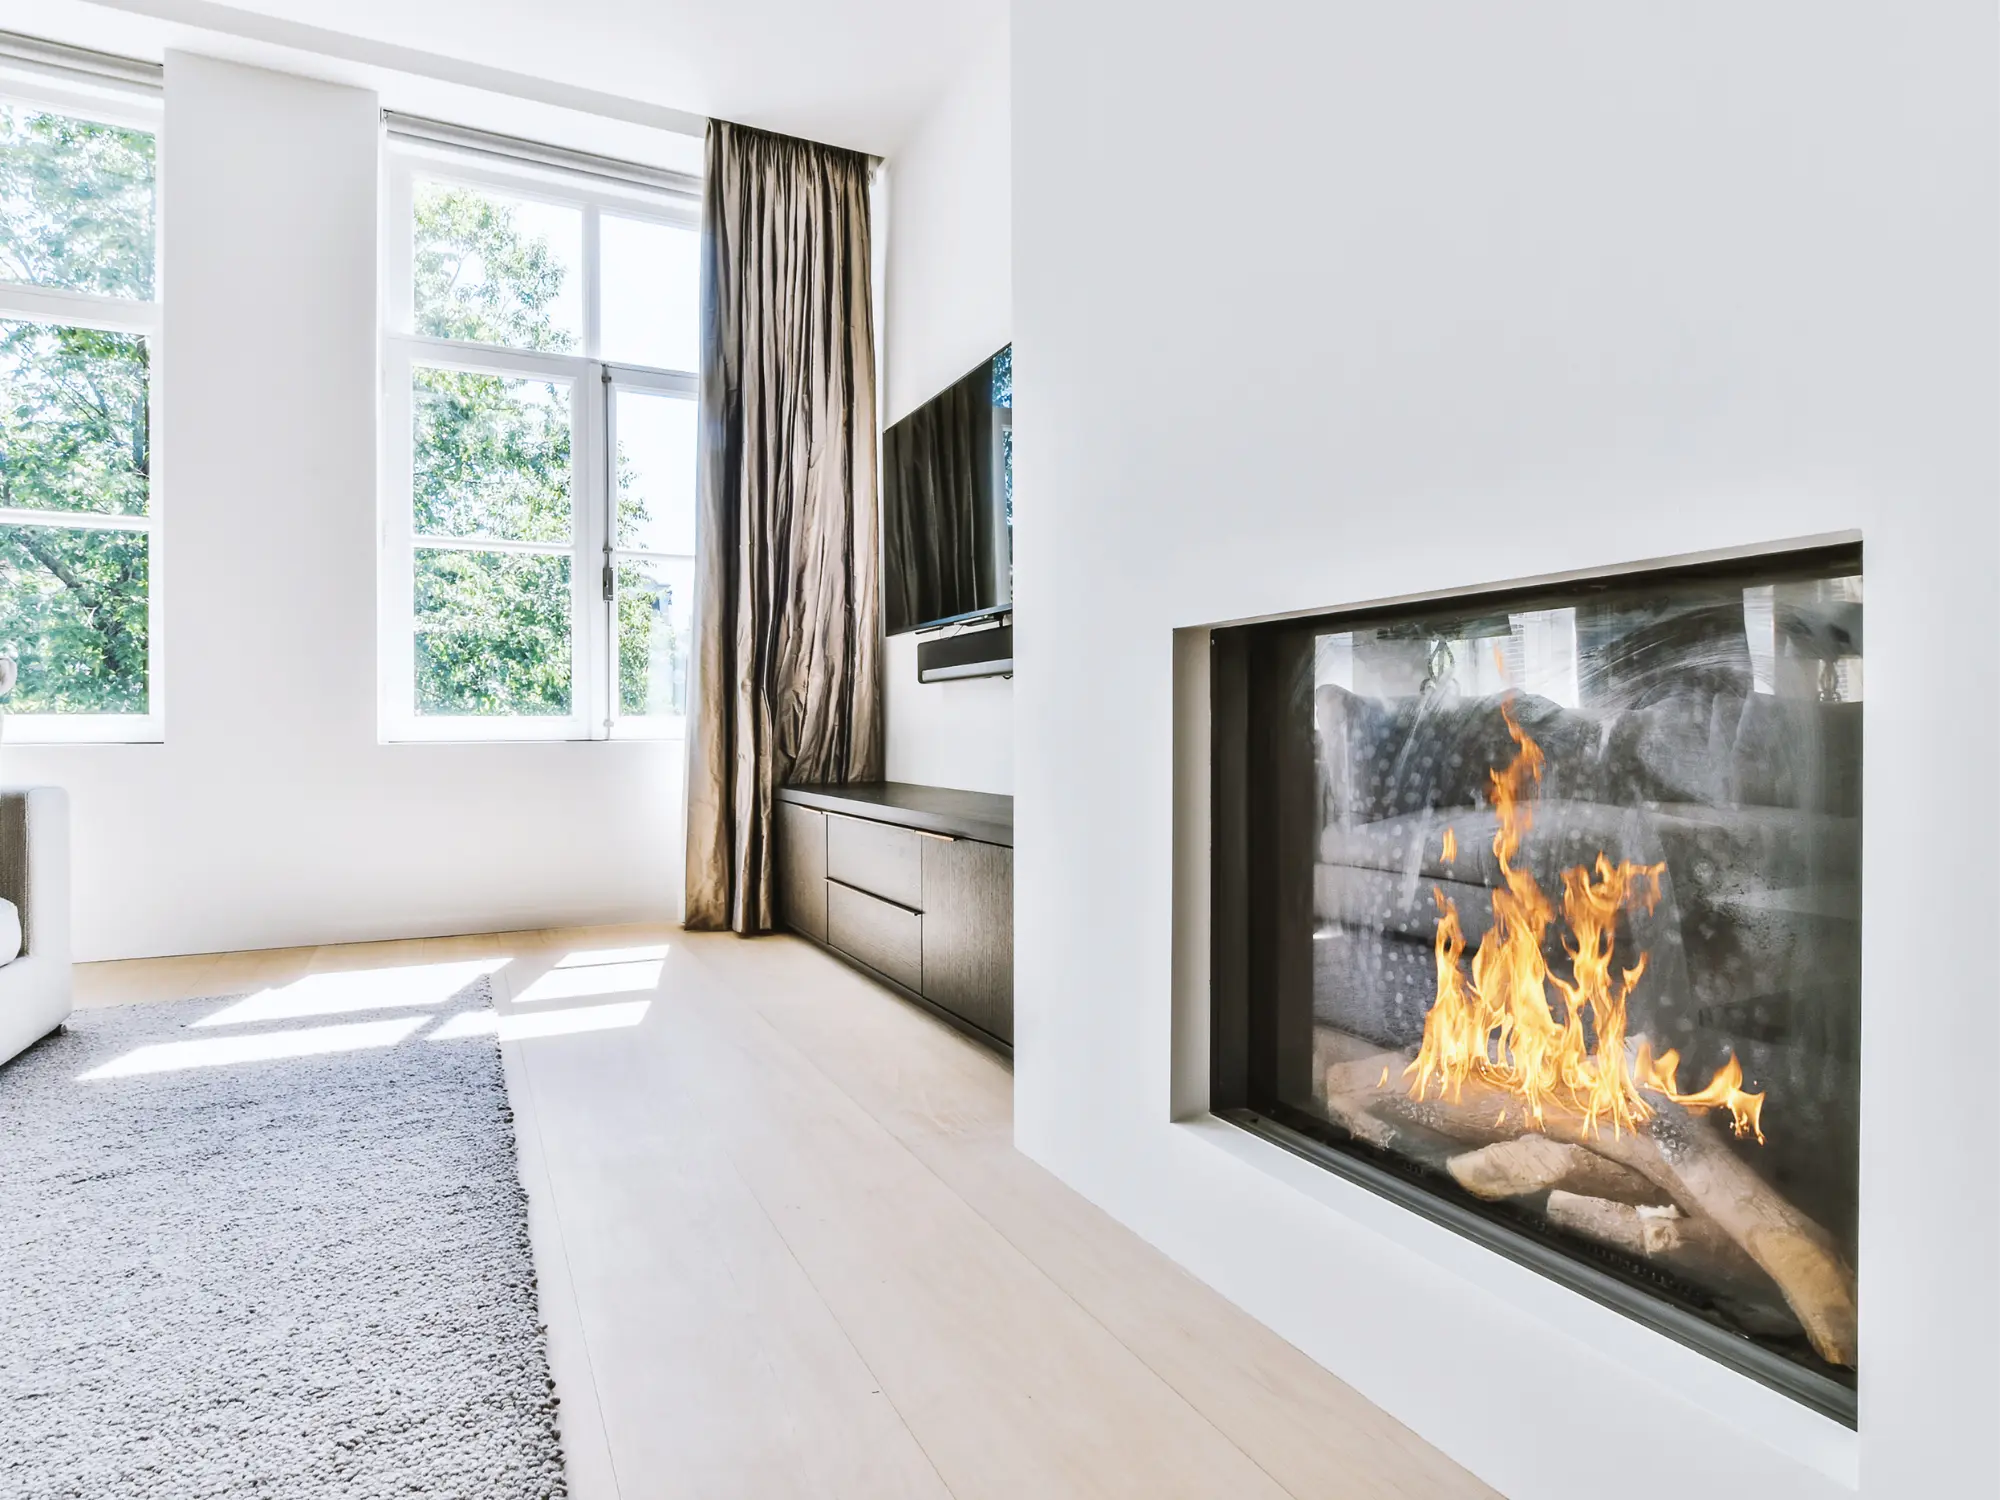 The Importance of Home Improvement: Chimney Breast and Composite Doors